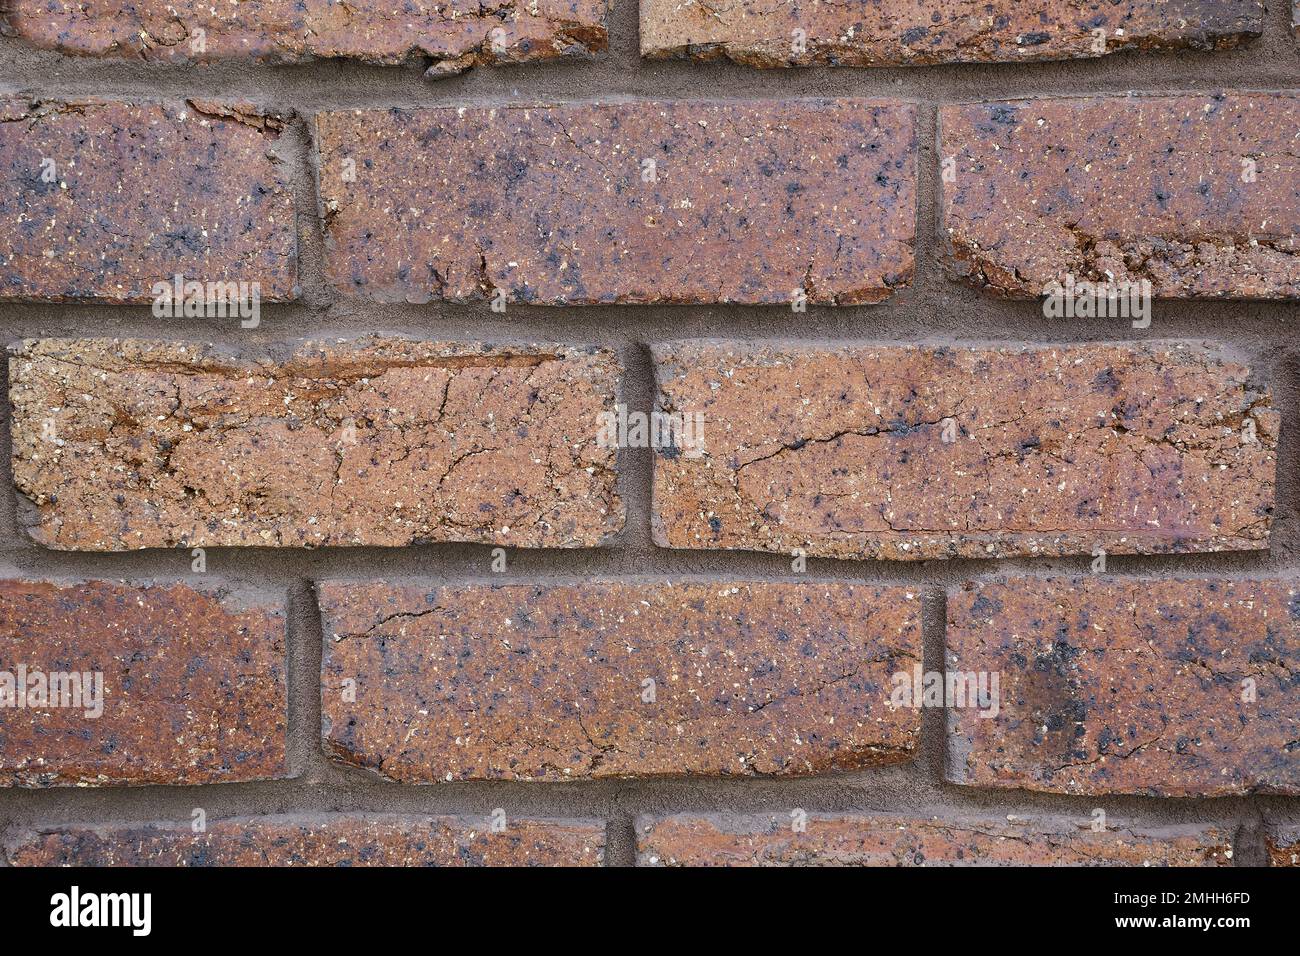 An extreme close-up view of a section of brownish, crimson coloured, coarse, rustic looking house bricks with vertical and horizontal joint lines Stock Photo